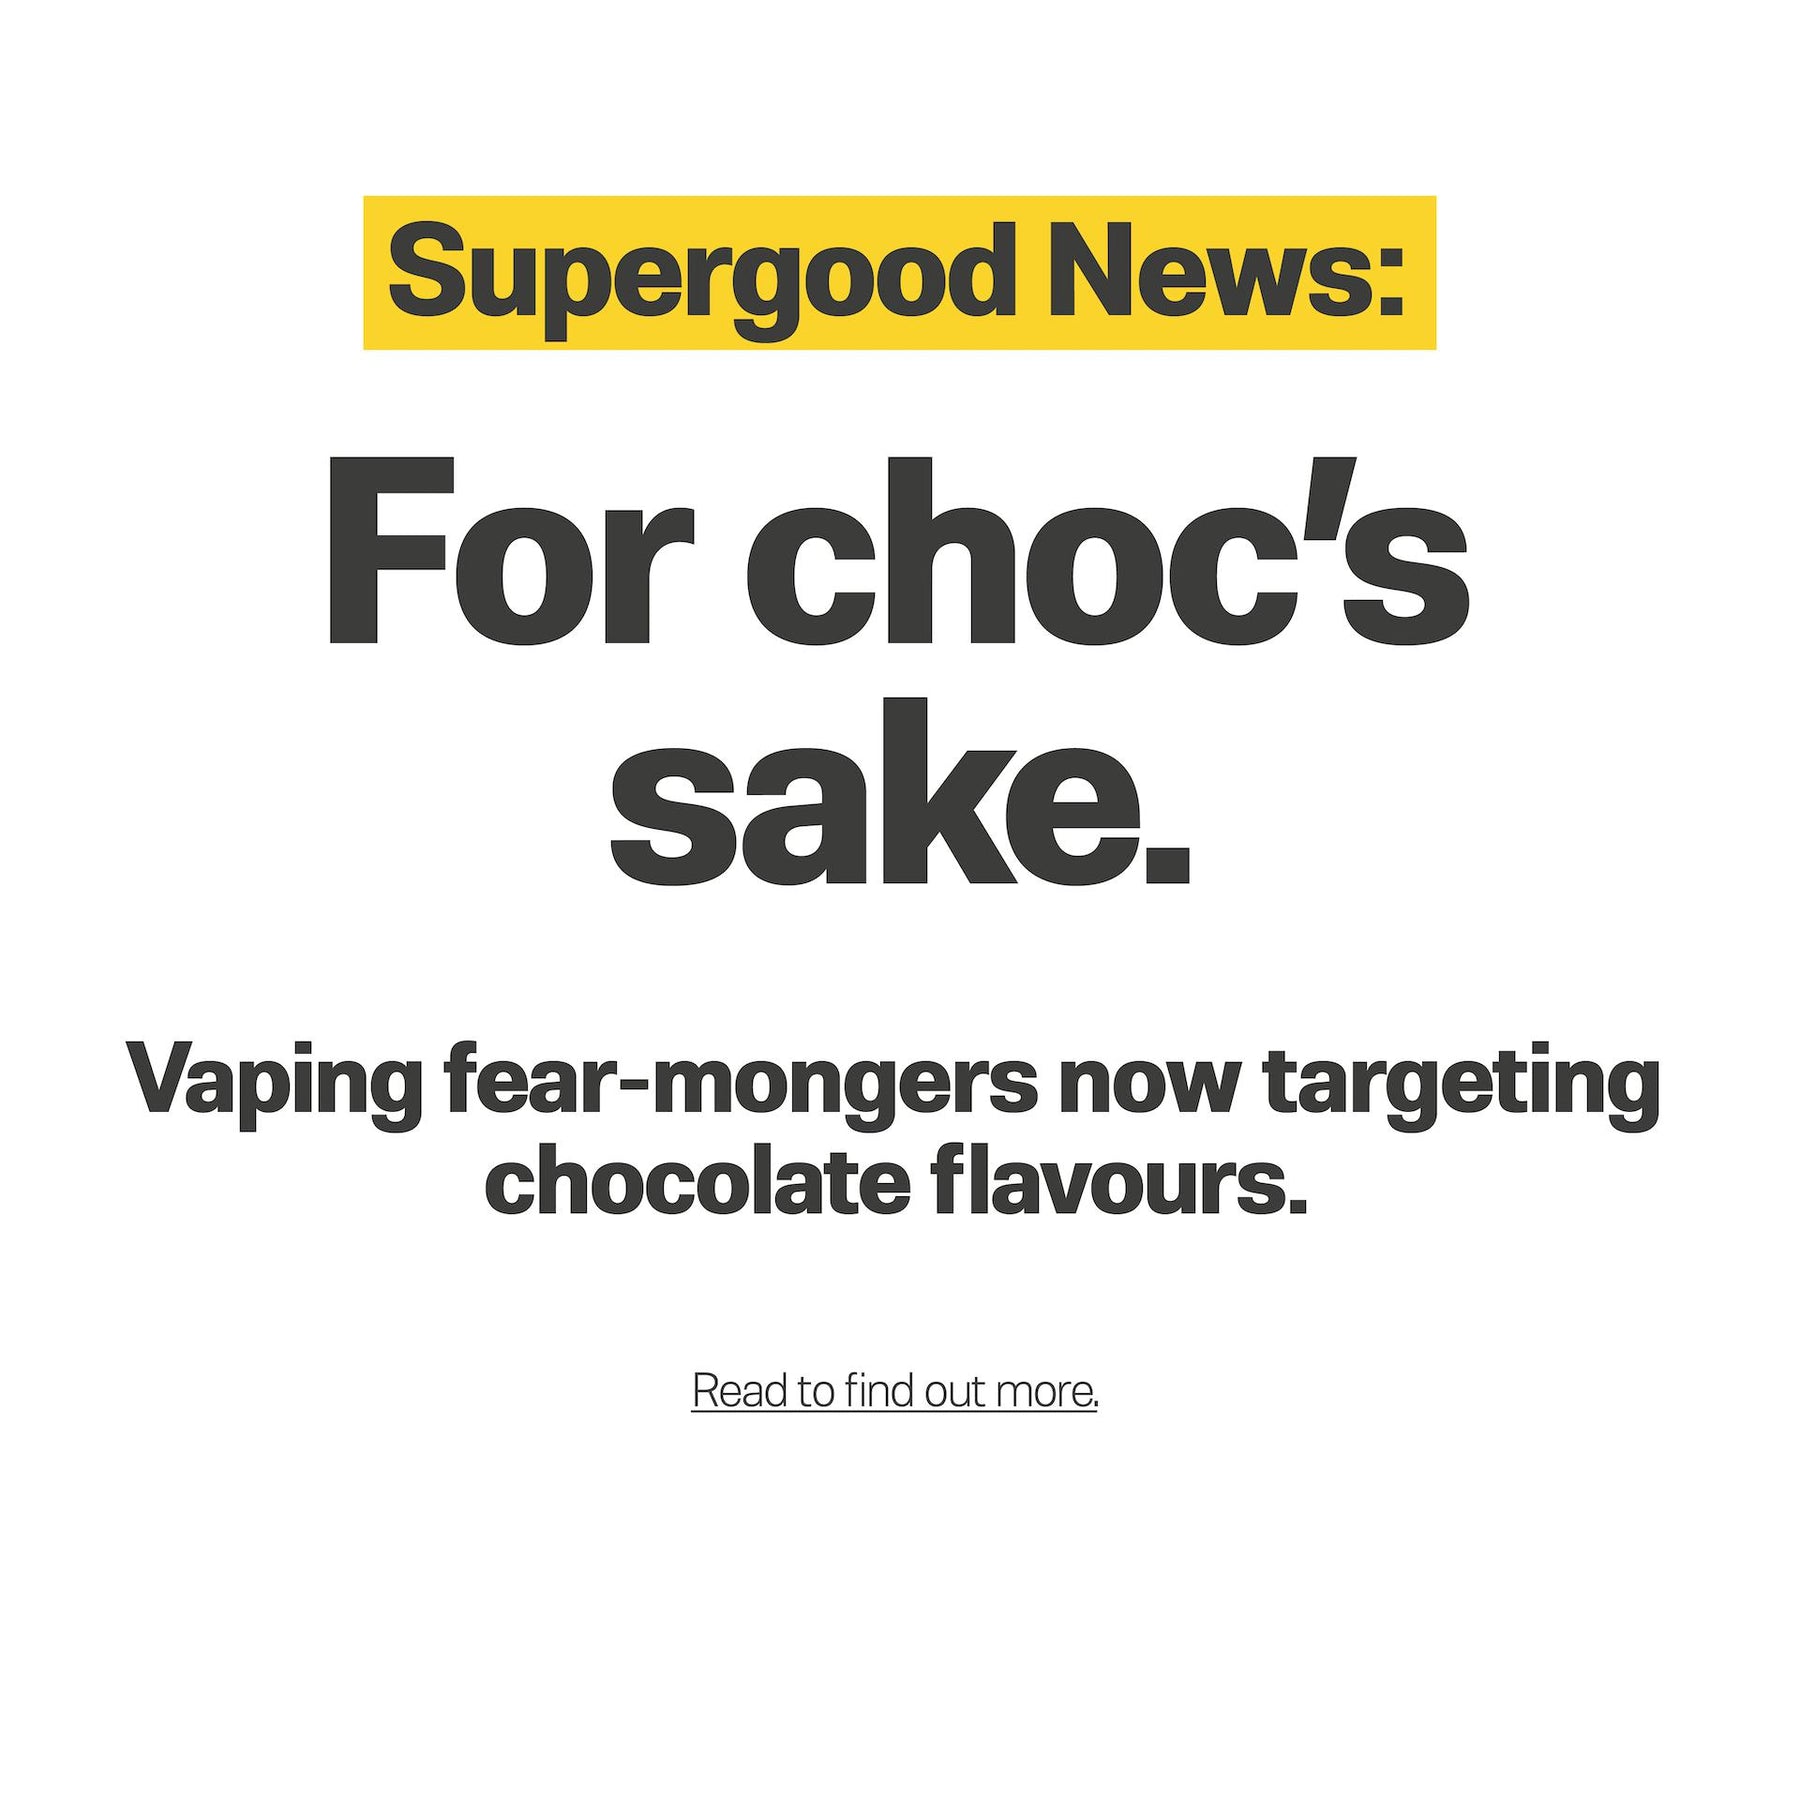 Vaping fear-mongers now targeting chocolate flavours.